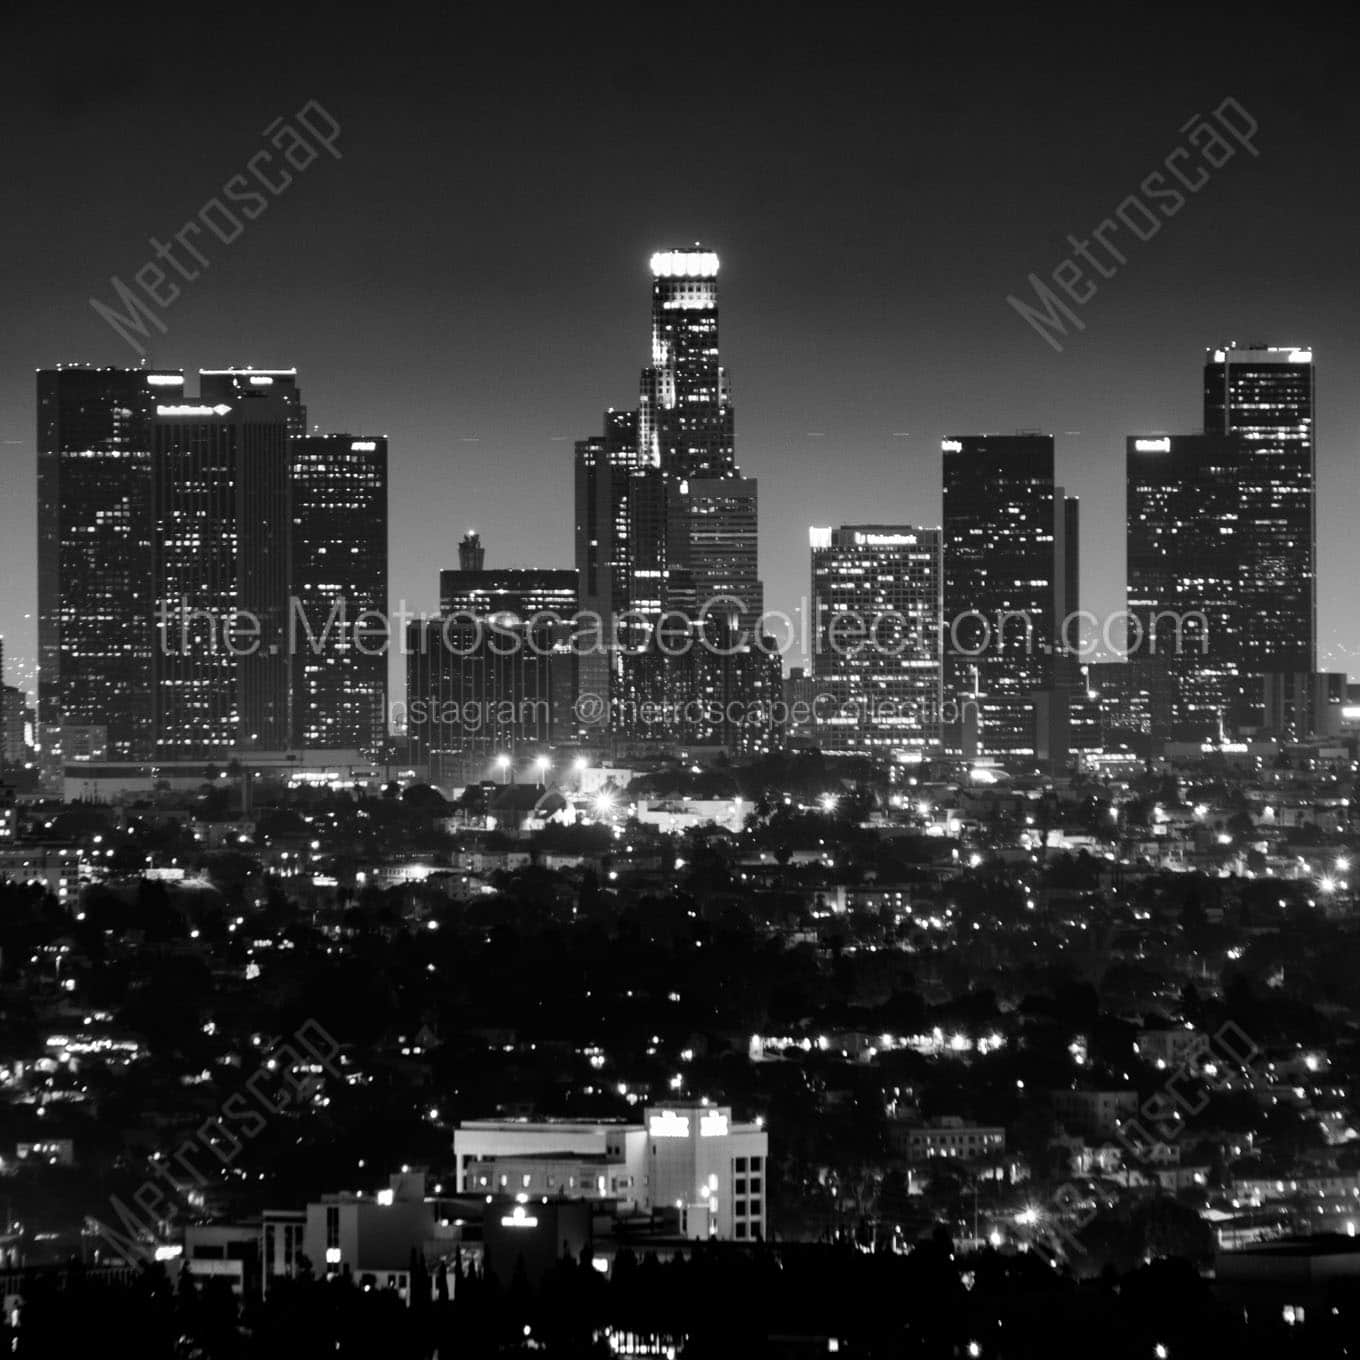 los angeles skyline from hollywood hills at night Black & White Office Art